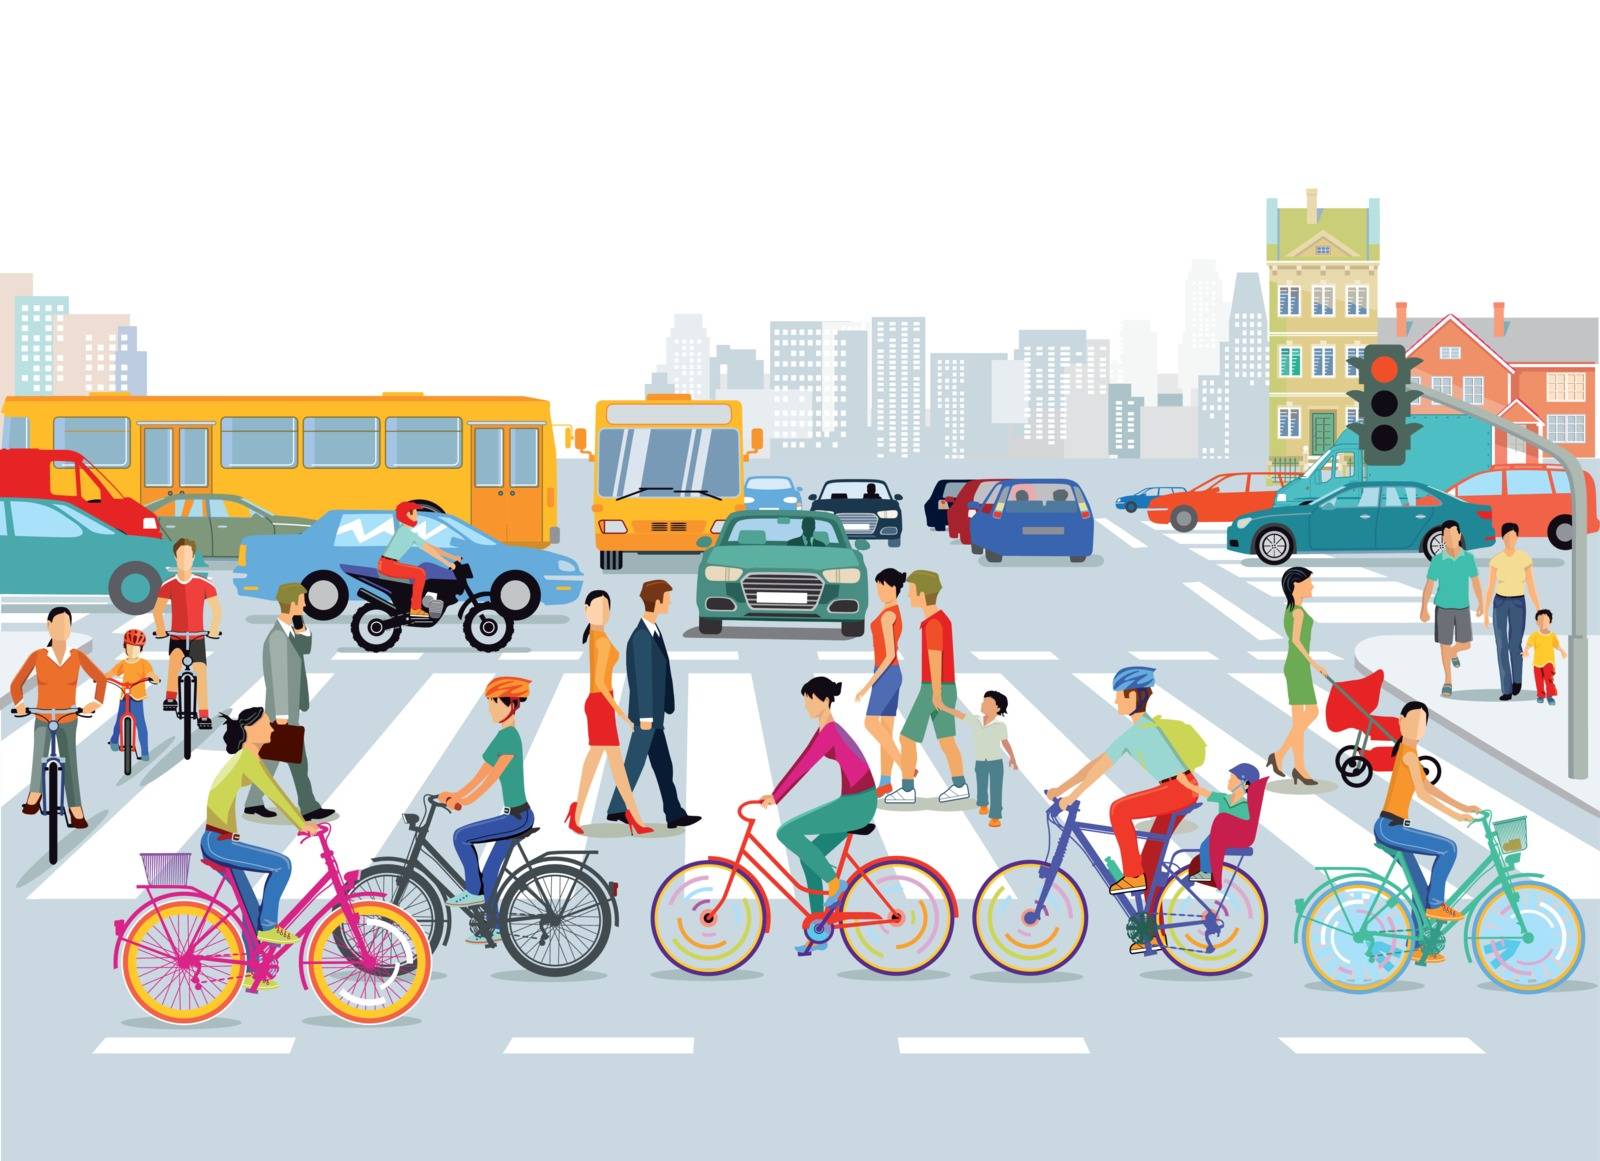 City with road traffic, cyclists and pedestrians, illustration by scusi